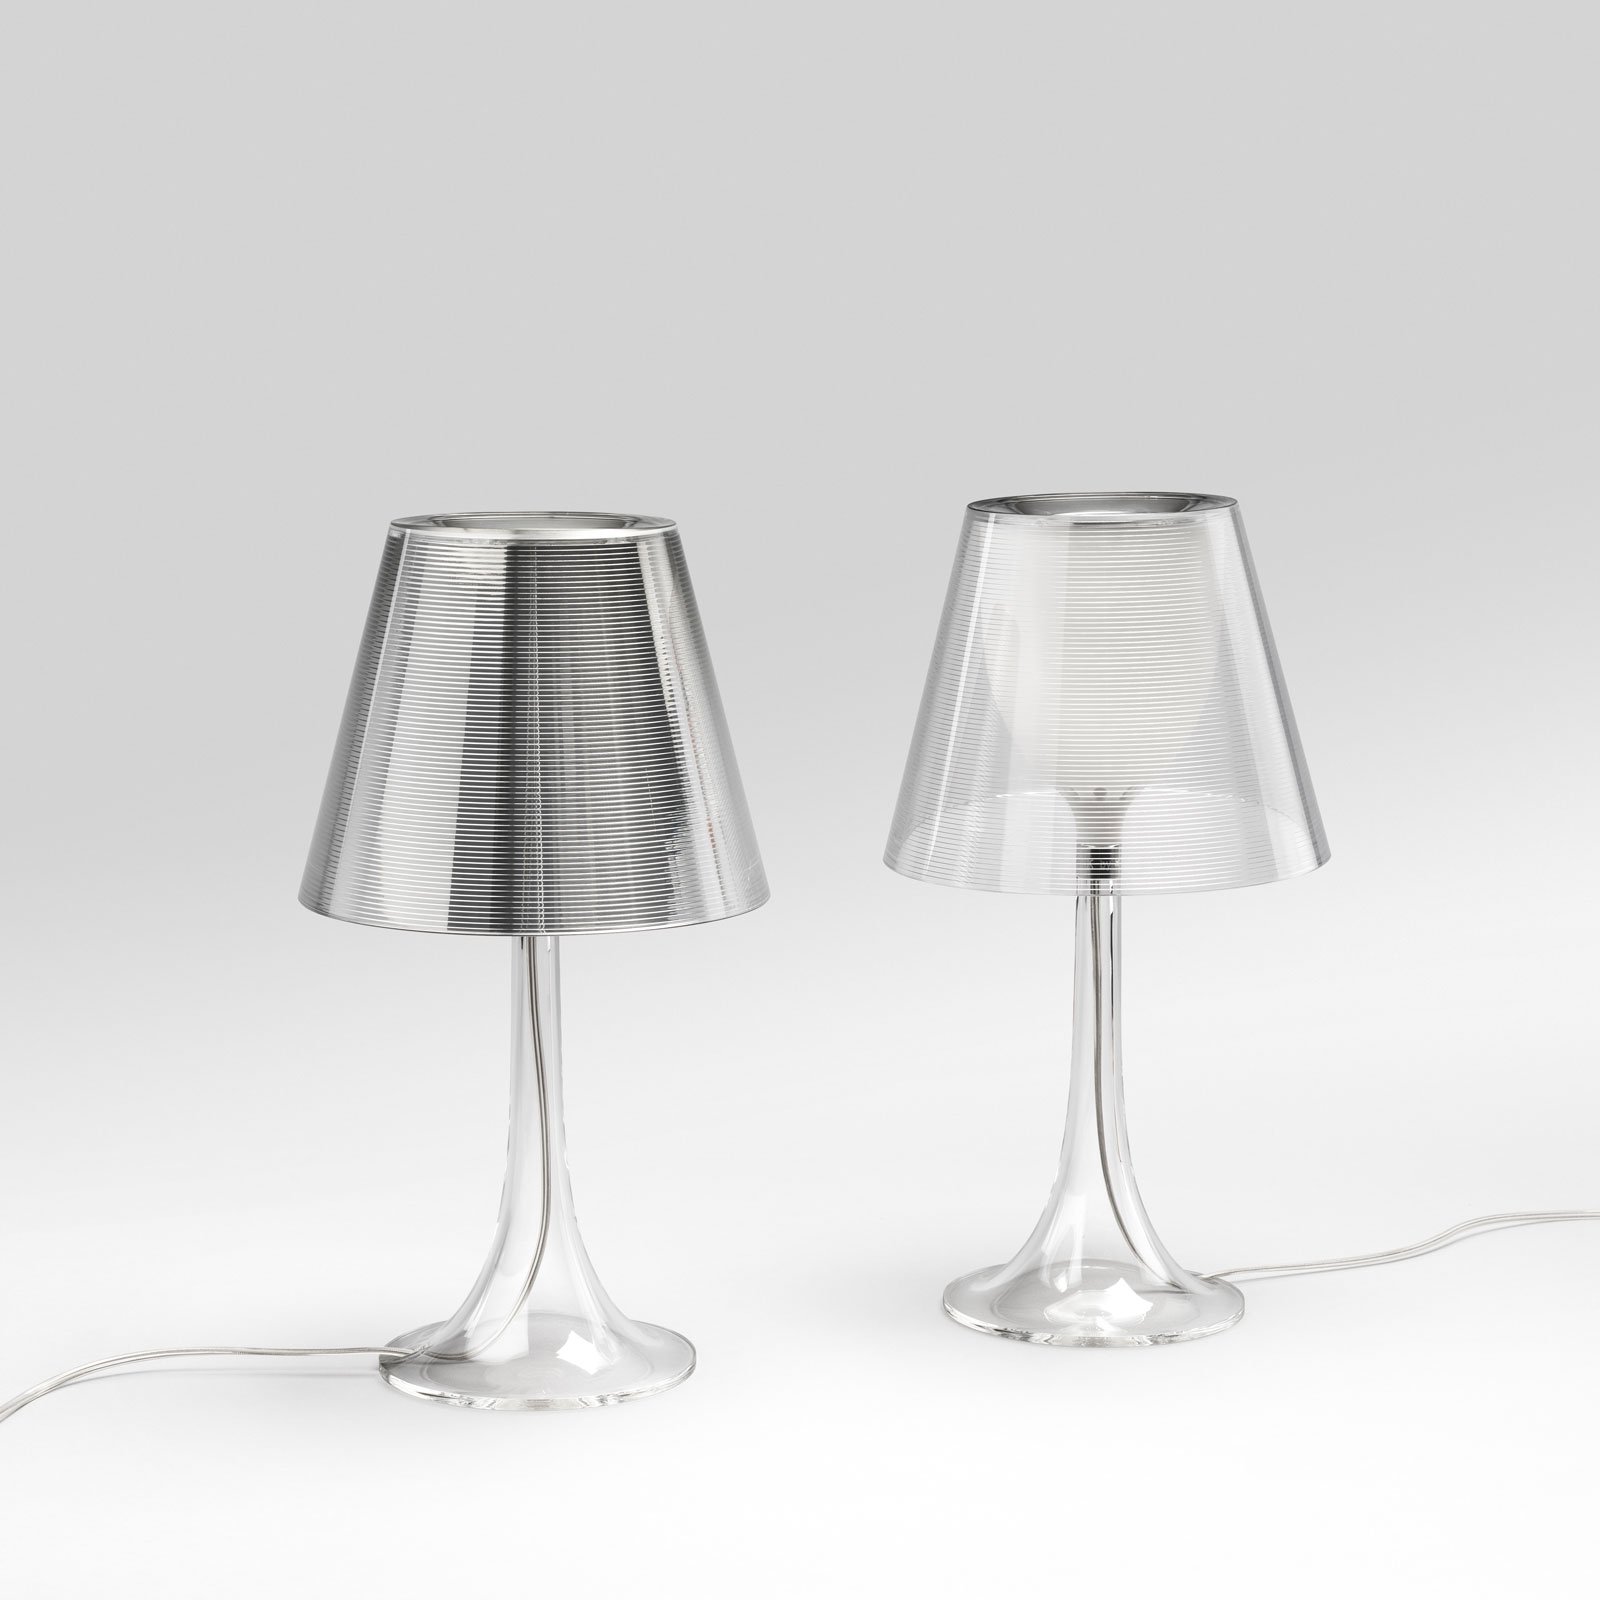 FLOS Miss K table lamp, dimmer switch, transparent